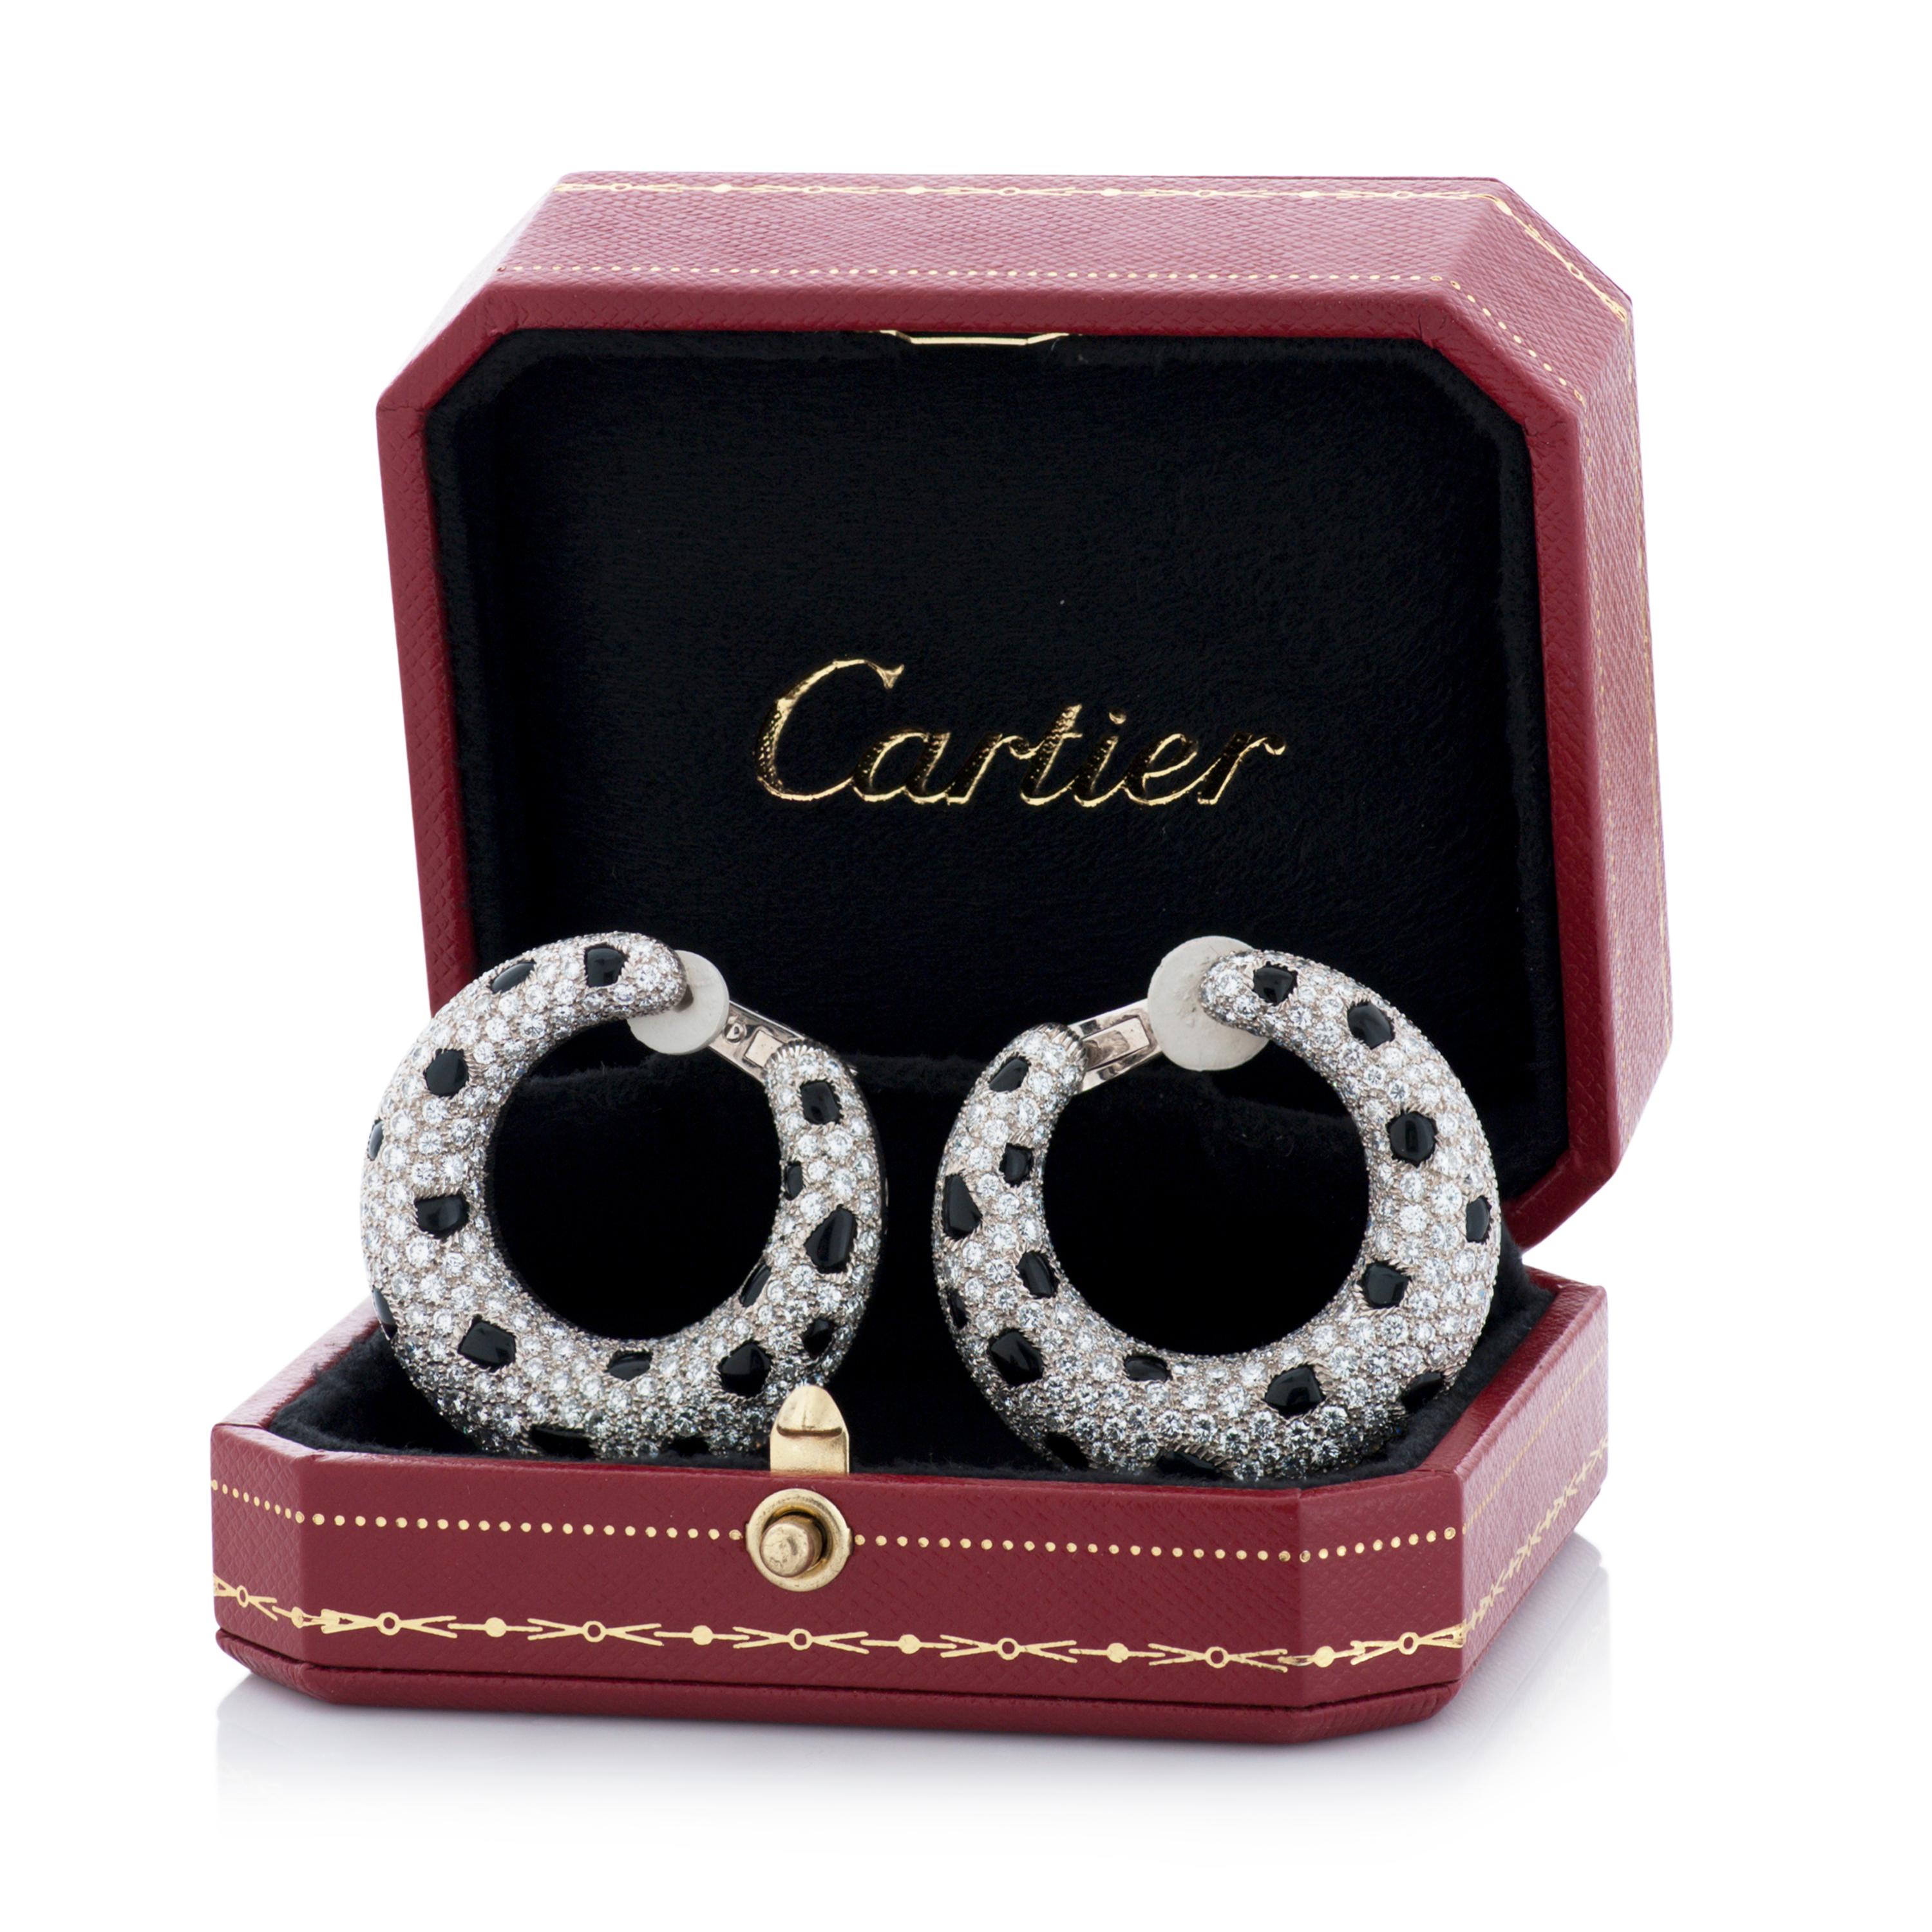 Vintage Cartier Panthere diamond and onyx hoop earrings in 18k white gold, accompanied by original Cartier box.

This pair of Cartier earrings feature approximately 9.42 carats of pave set round brilliant cut diamonds with E-F color and VS clarity,